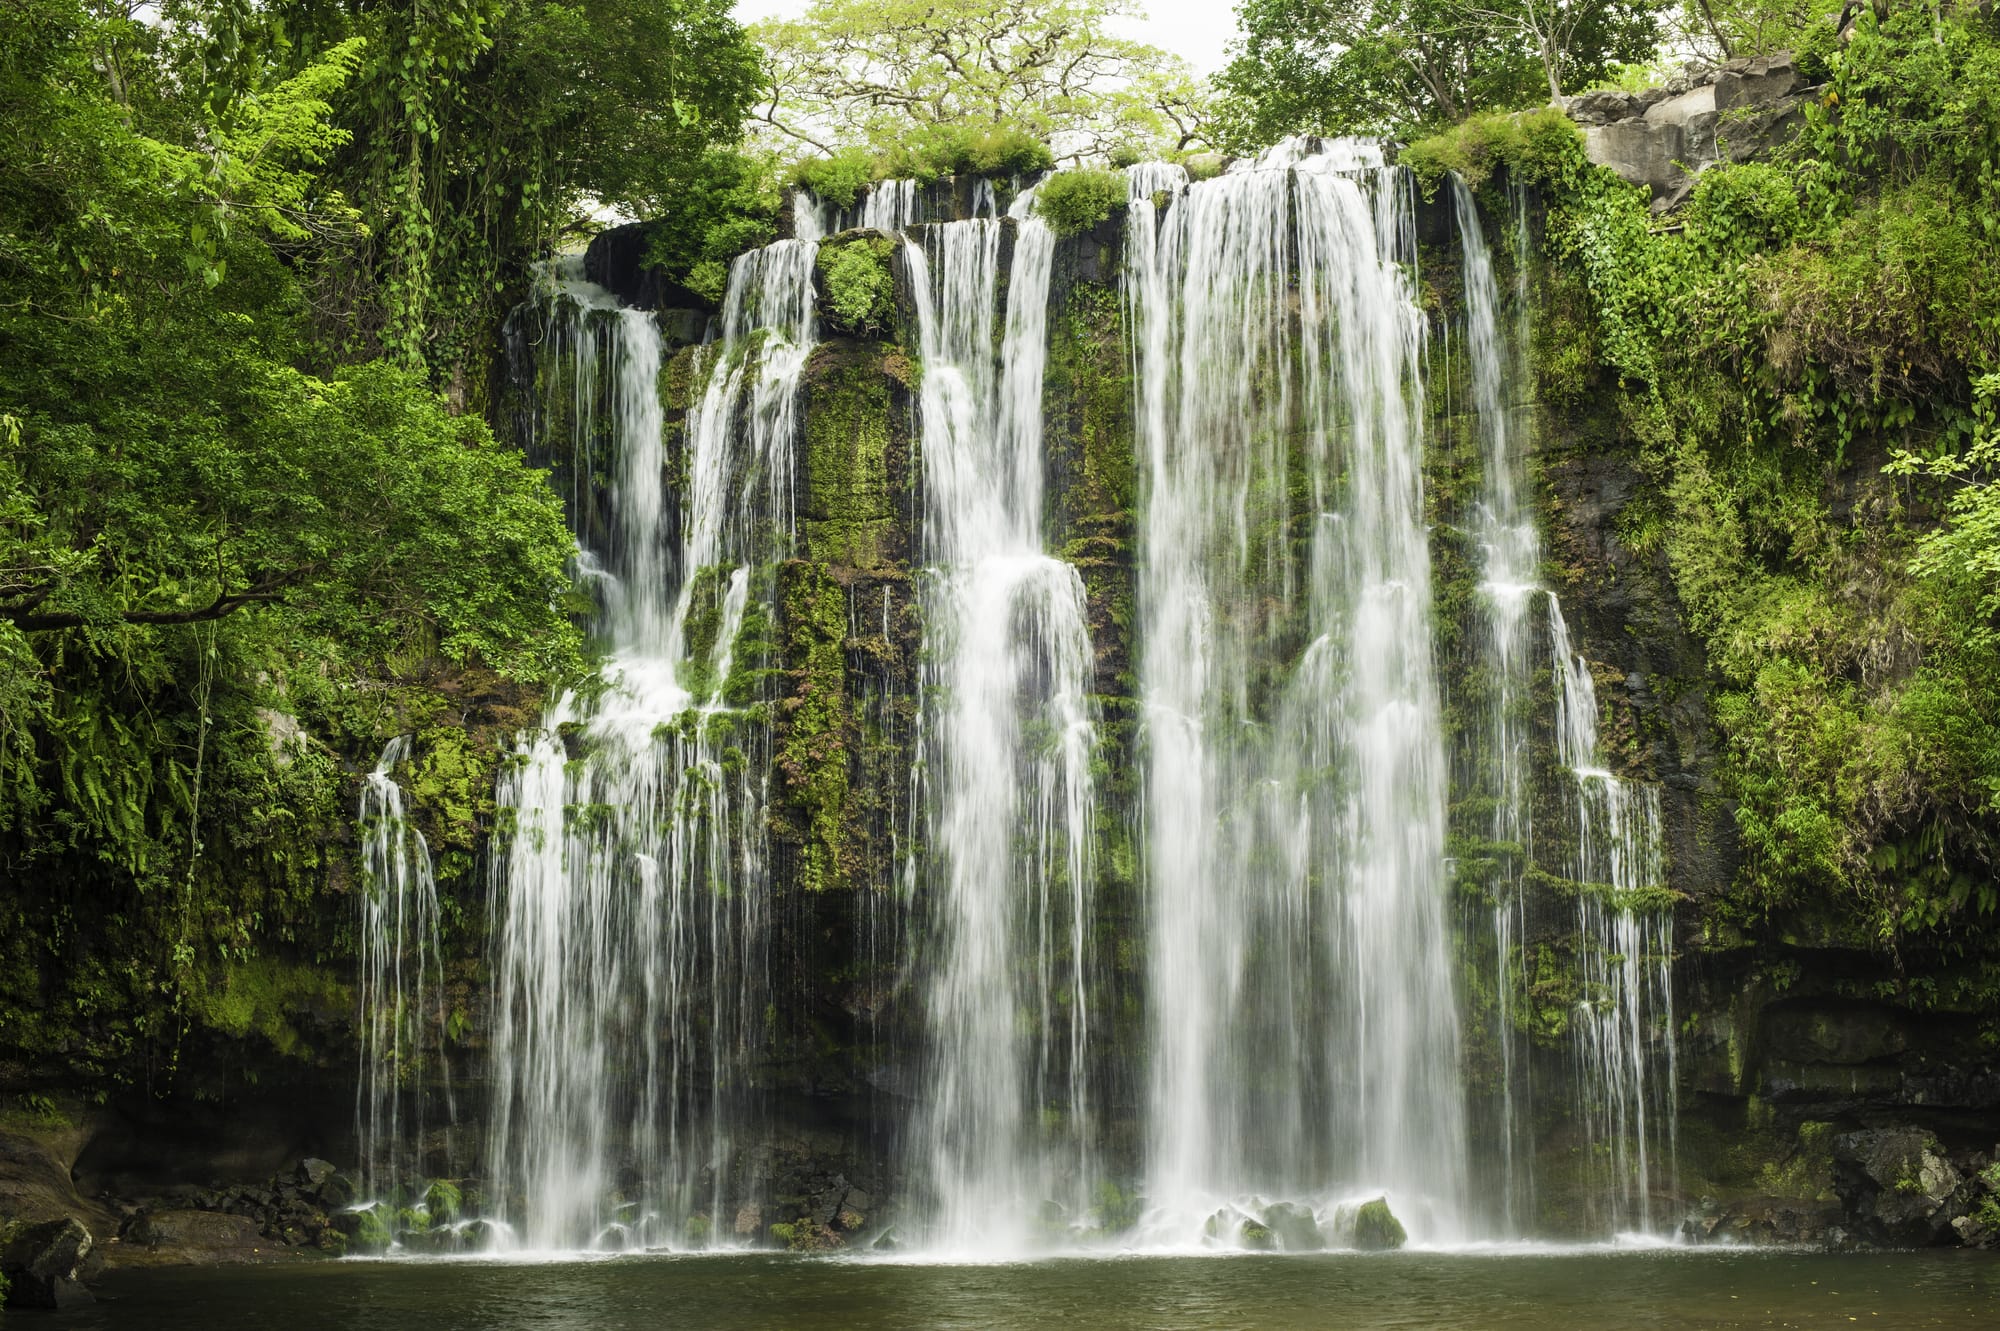 discovering-waterfalls-in-the-jungles-of-costa-rica.jpg